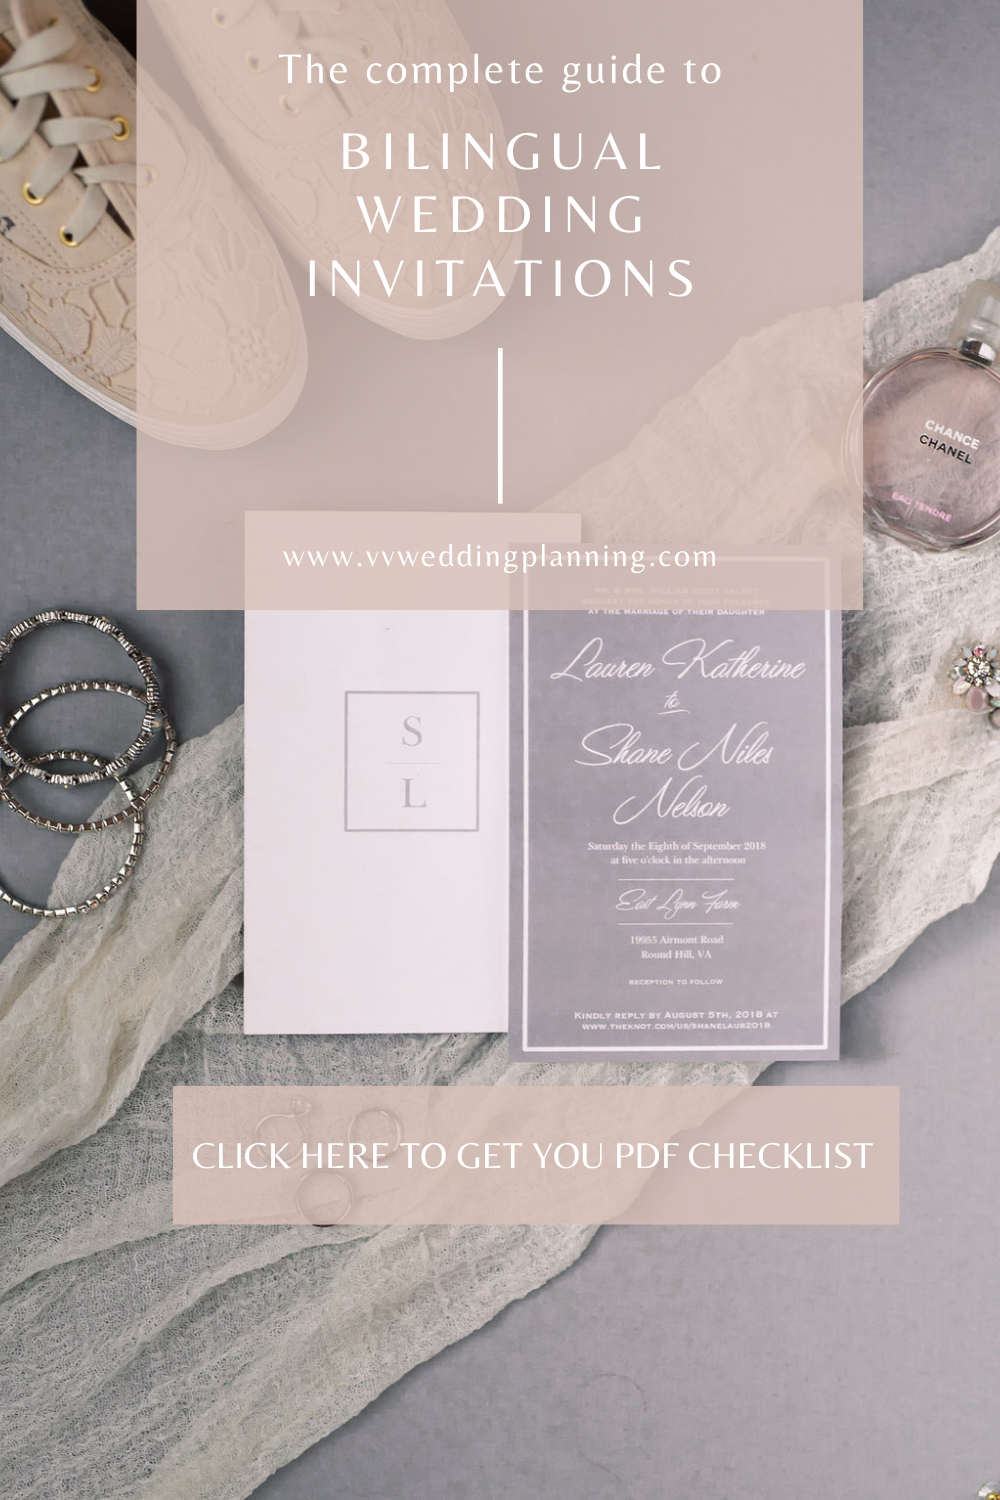 Your Complete Guide to Bilingual Wedding Invitations